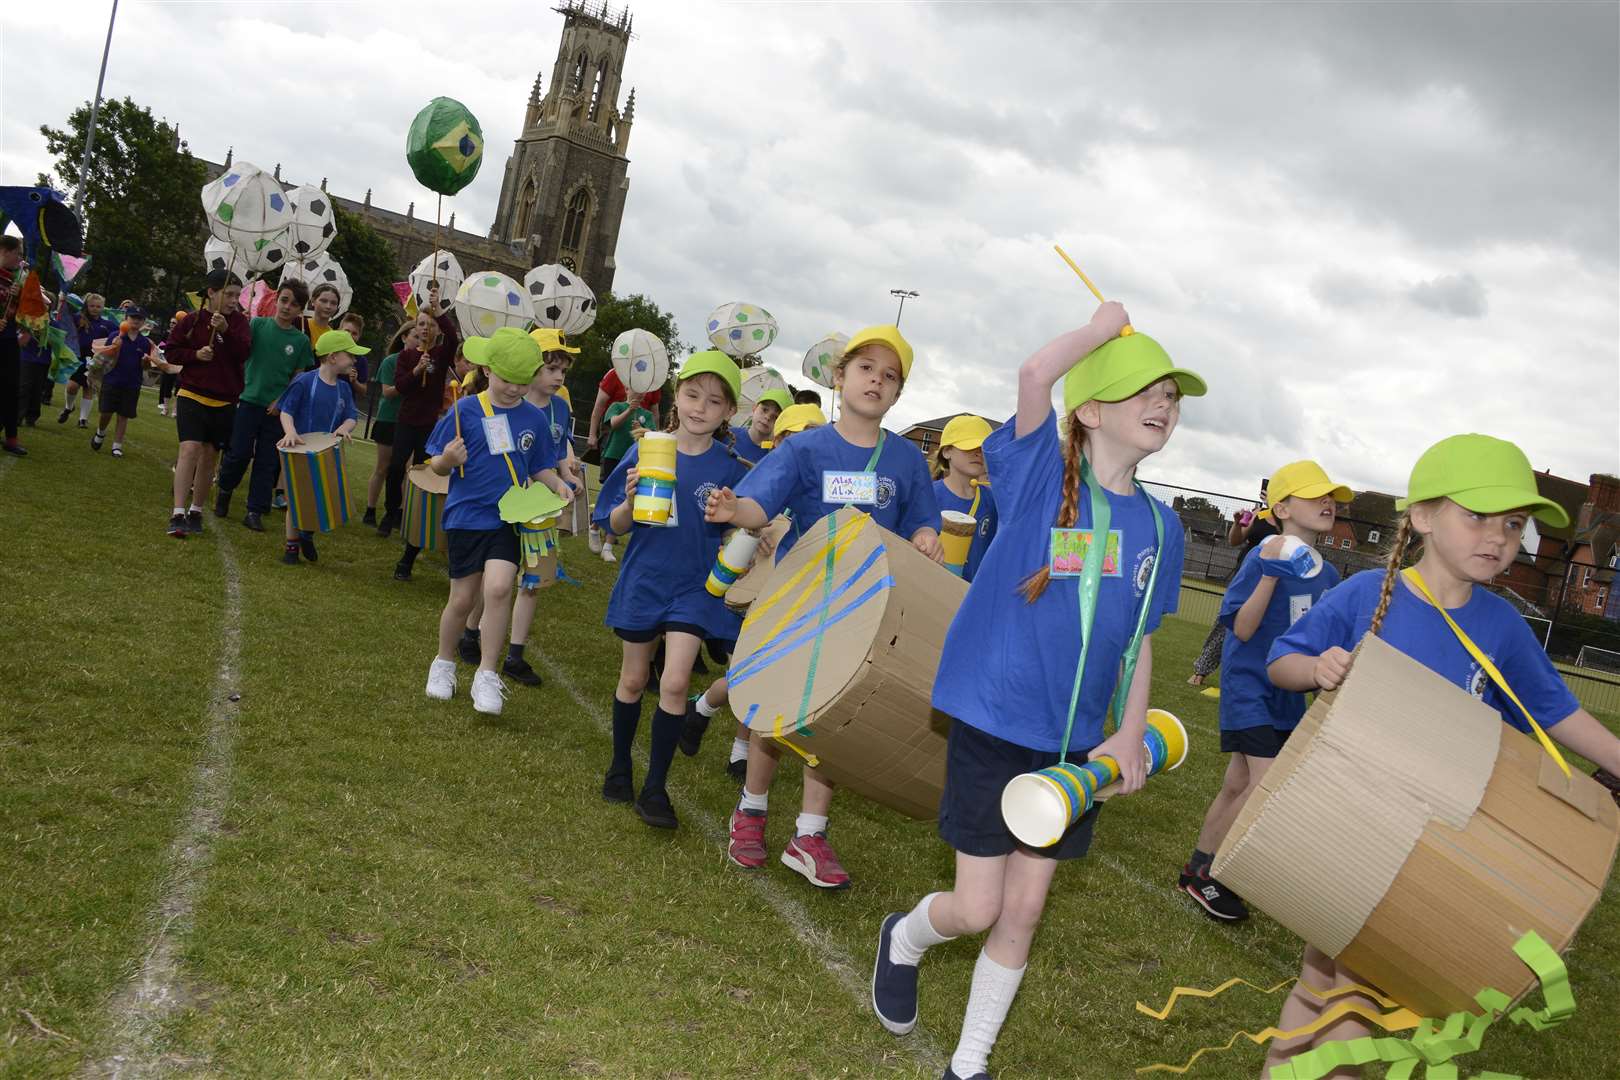 Priory Infants Primary School joined the parade with homemade drums and colorful tissue paper streamers